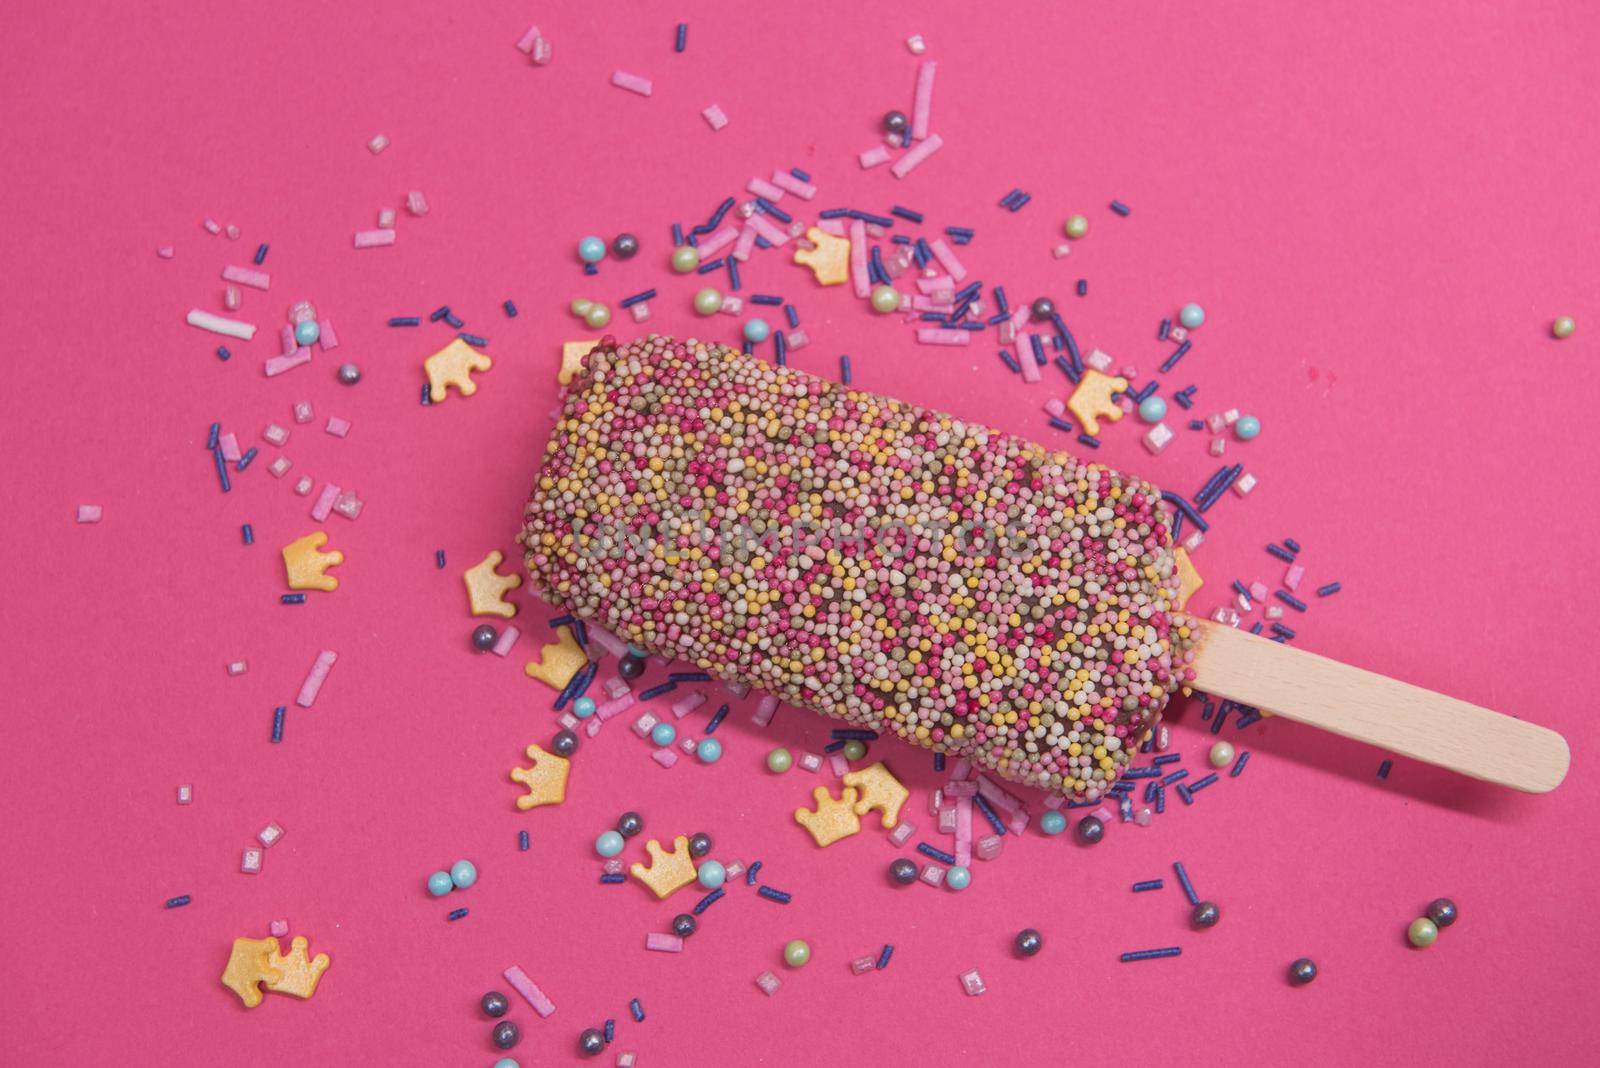 Ice cream on stick with colorful sprinkles over pink background